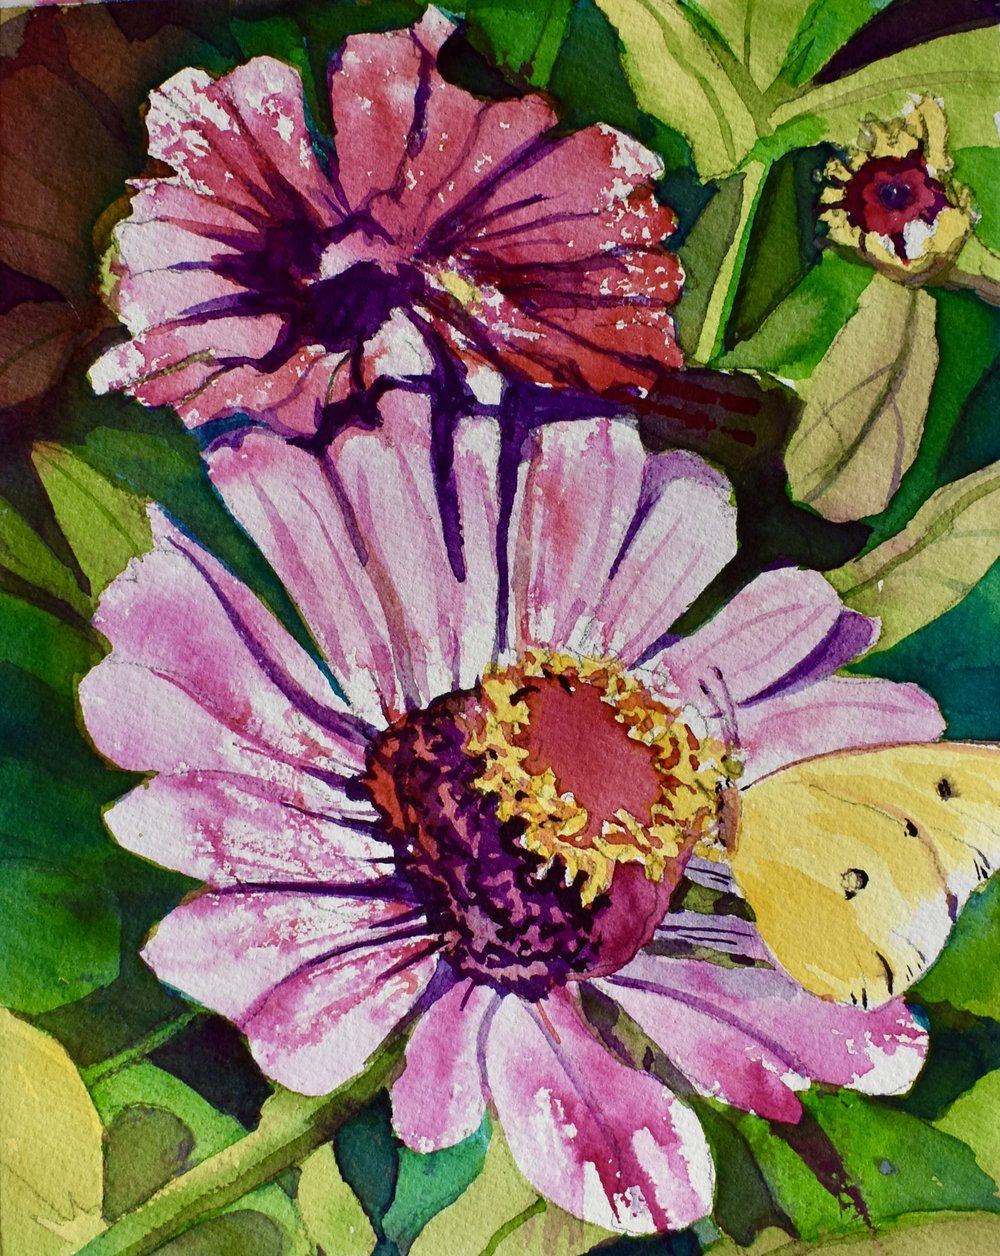 How Do You Paint That? Book 3 — Janet Nunn Watercolors